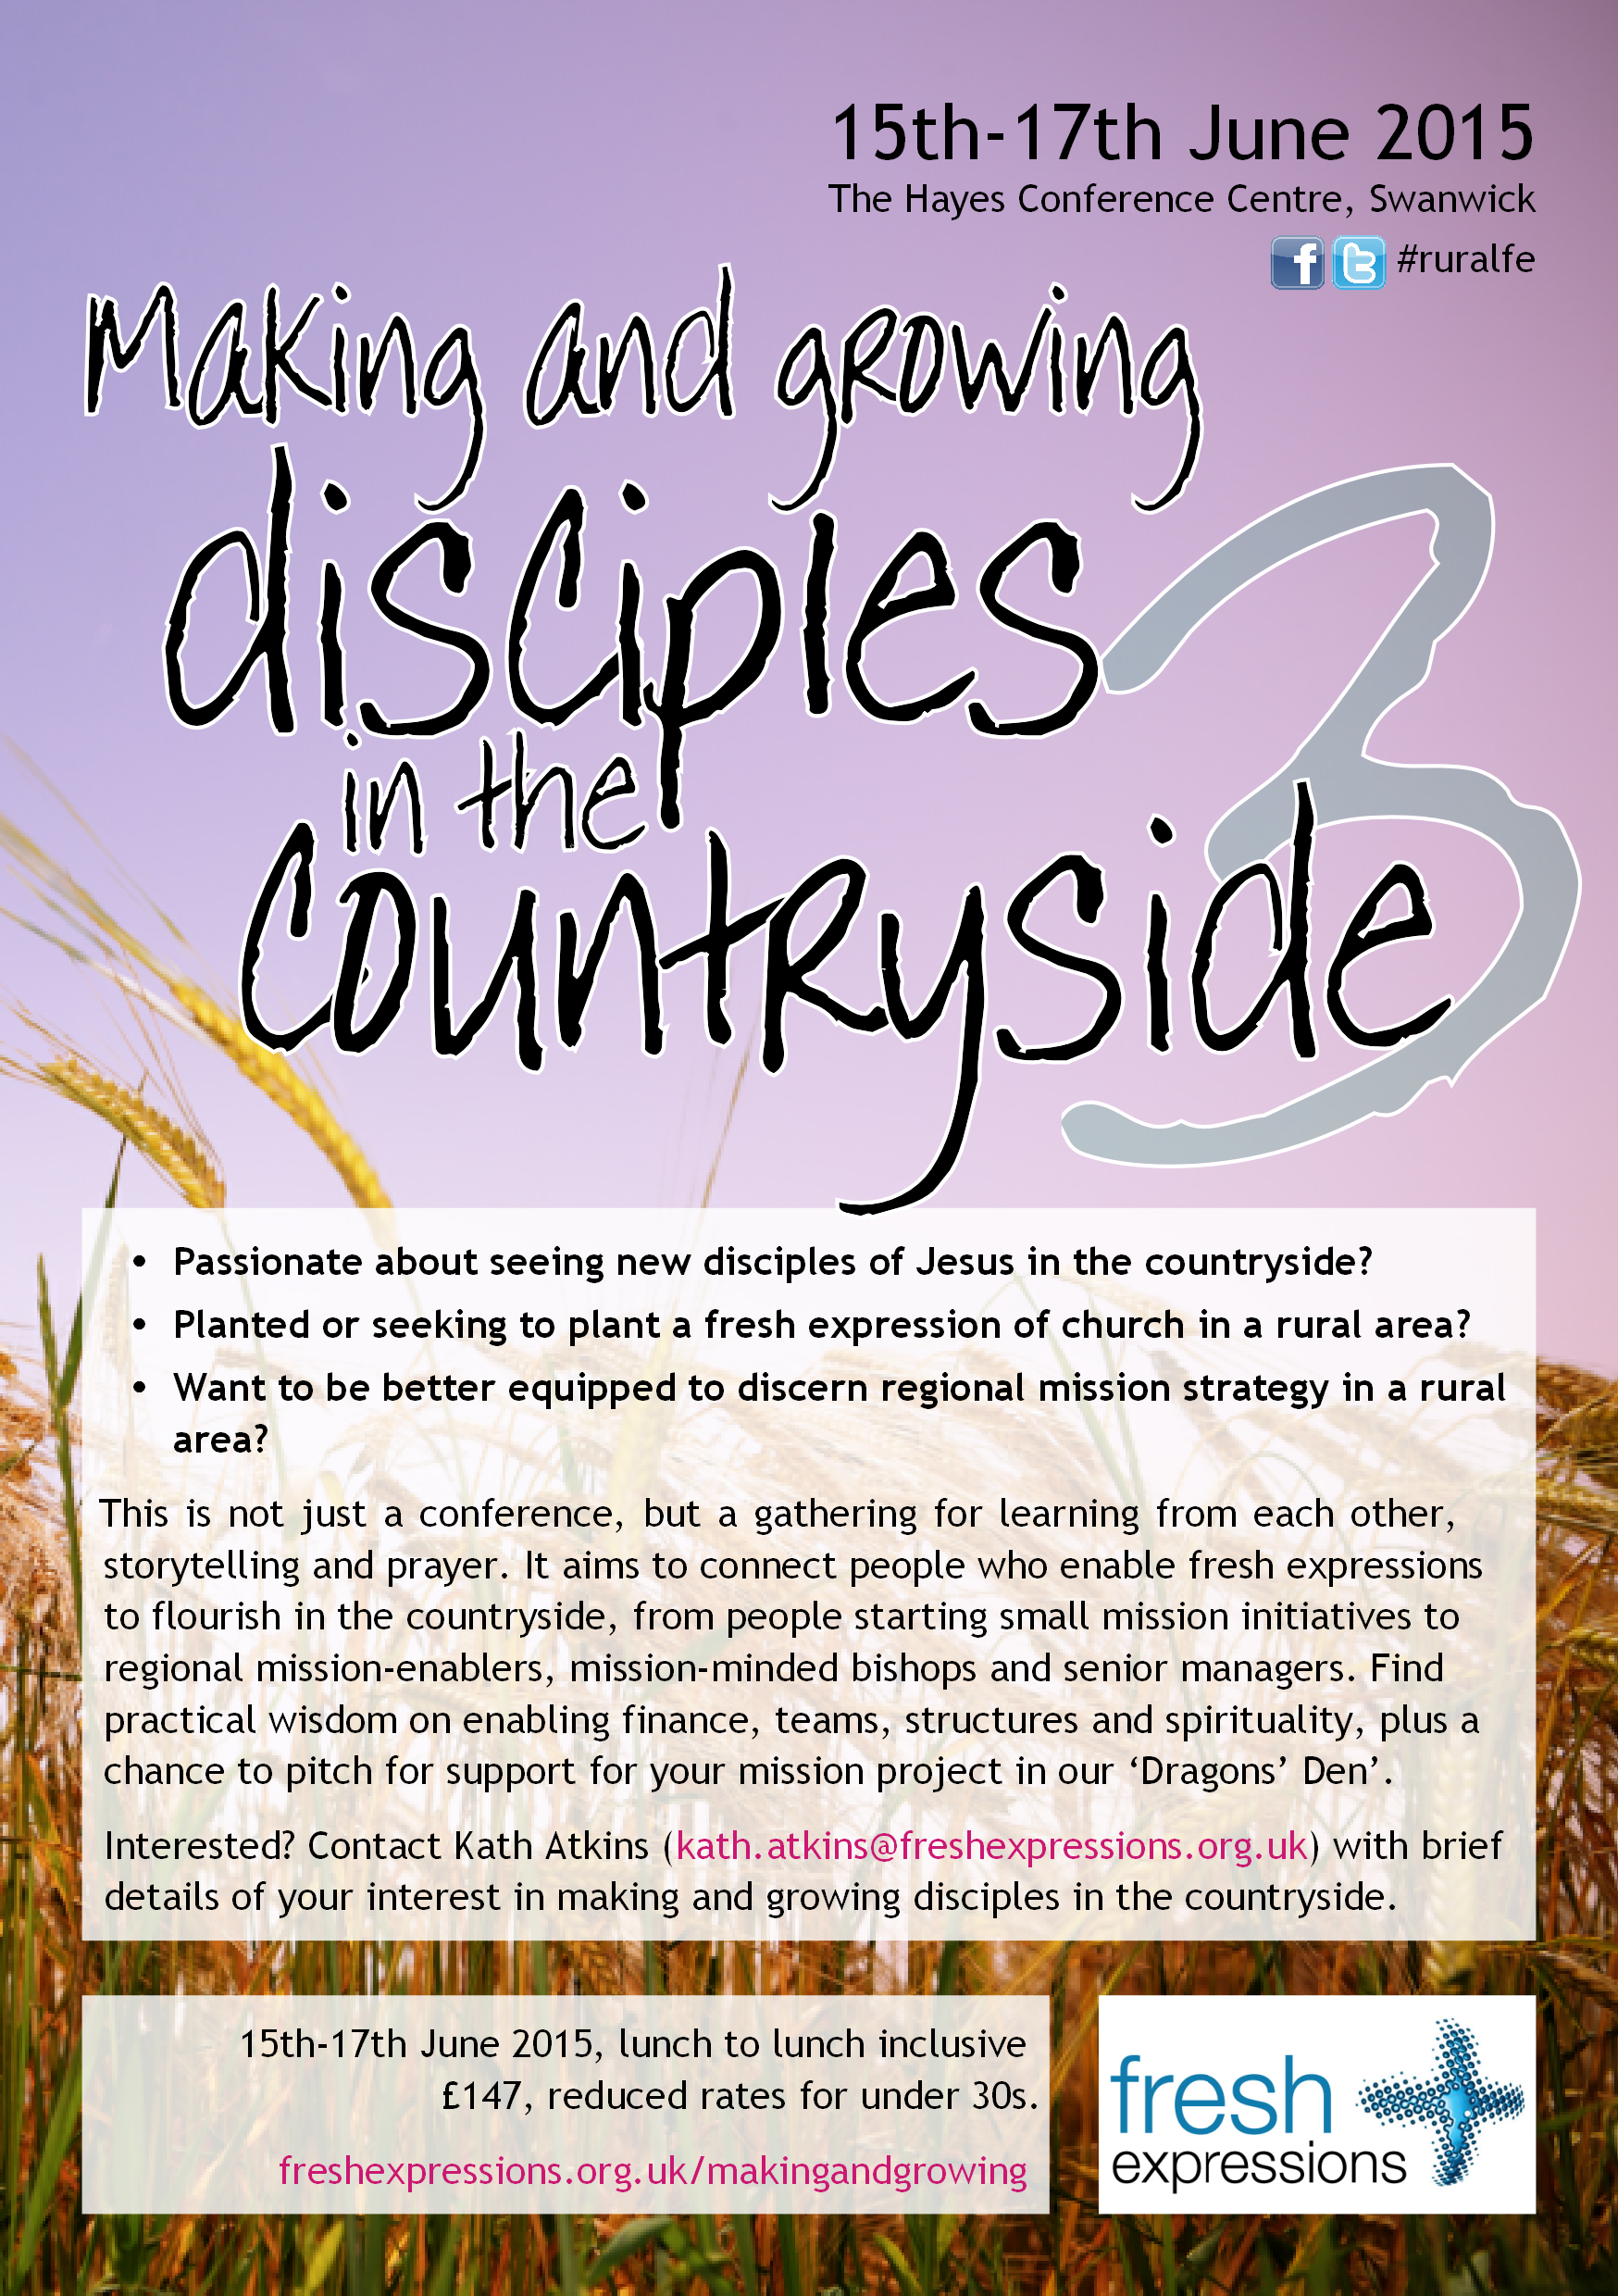 Making and growing disciples in the countryside